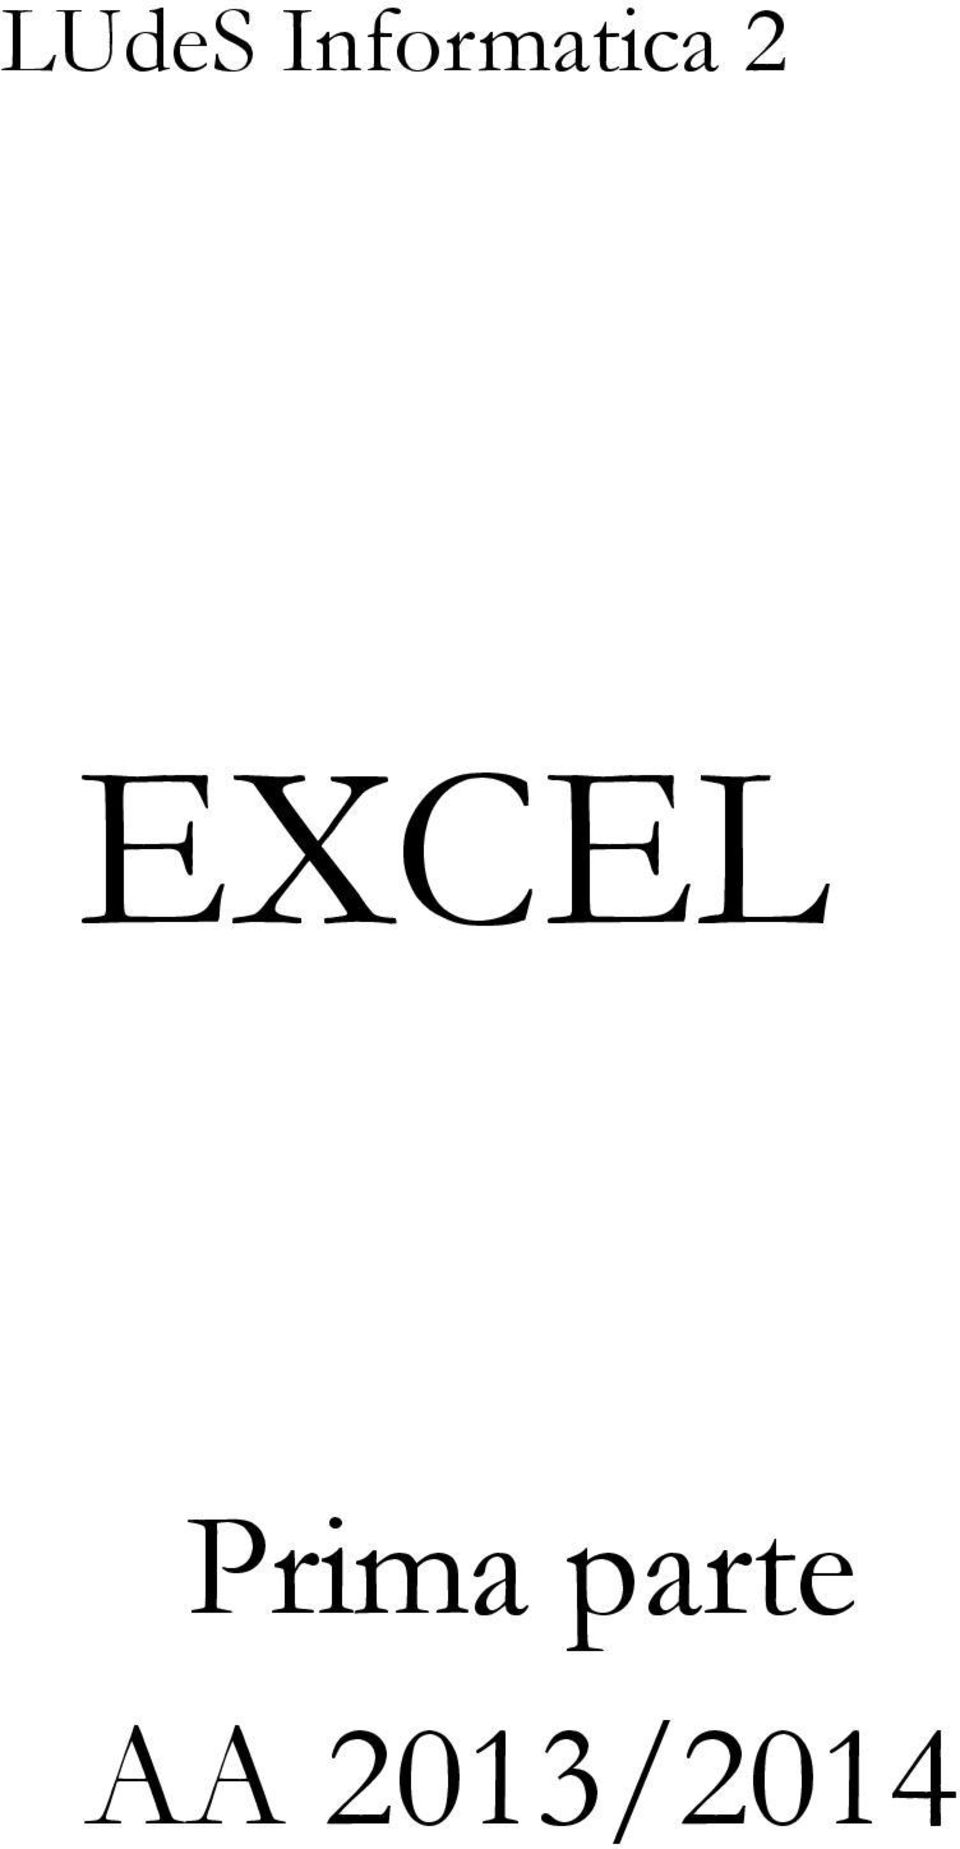 2 EXCEL